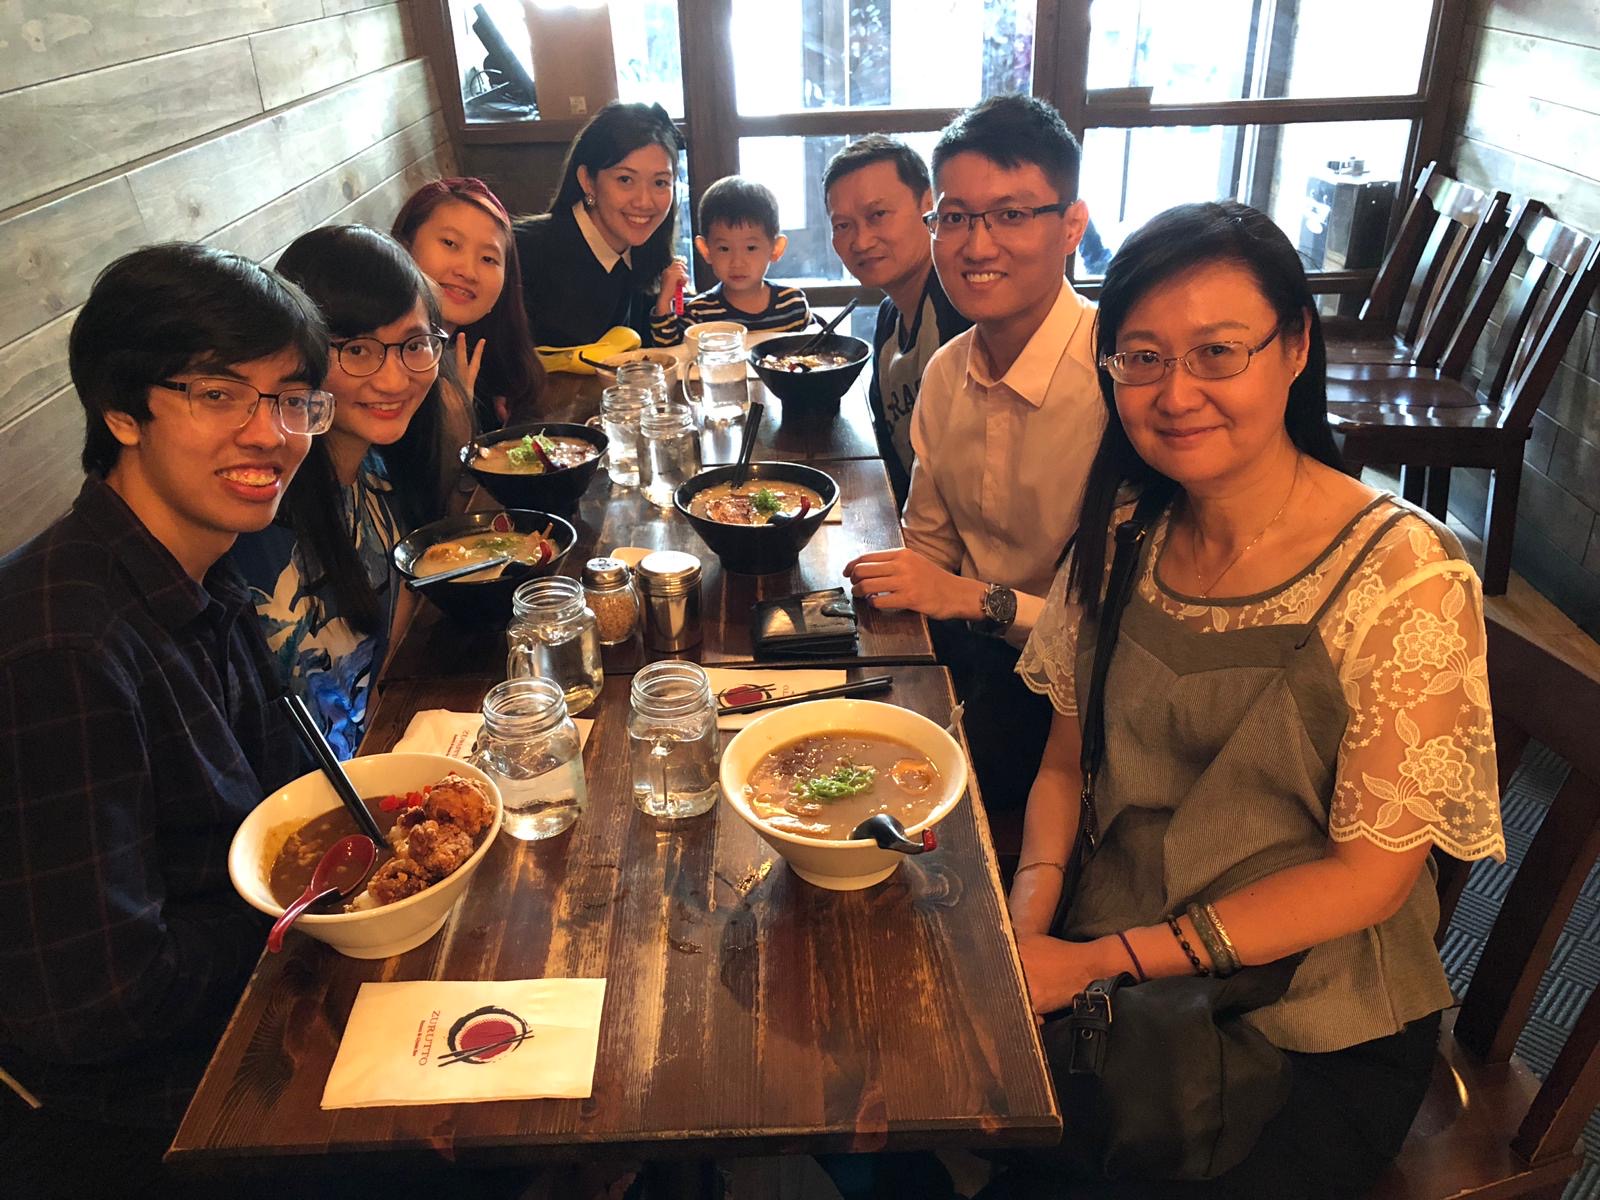 Group photo of Cheng Jin and family at a restaurant